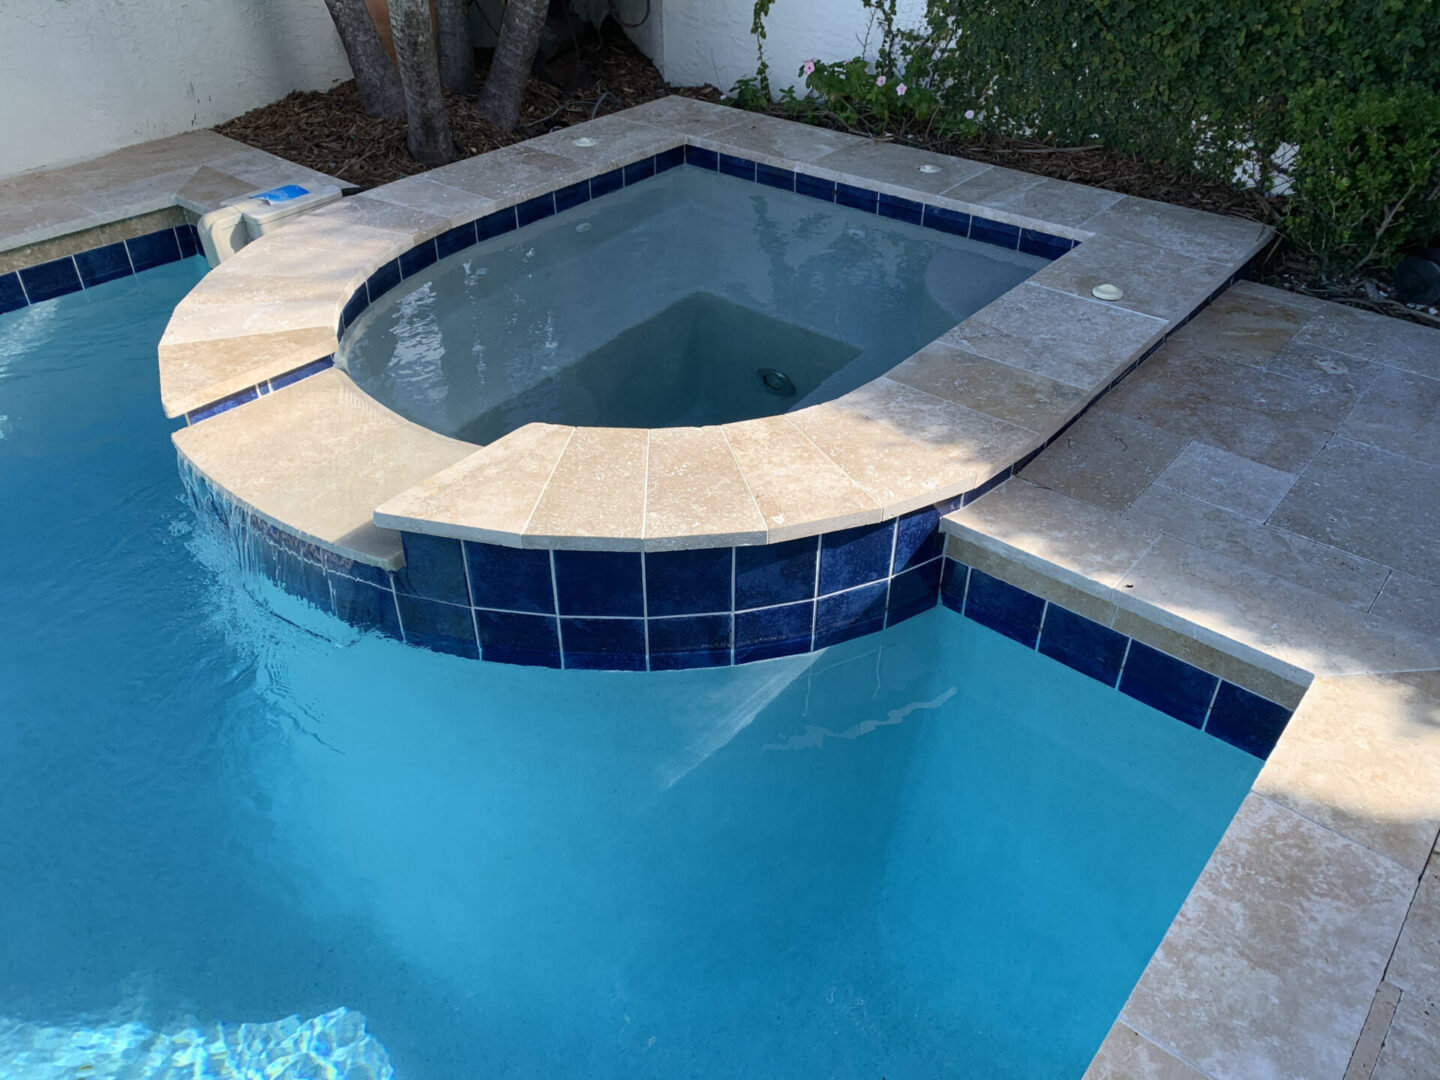 A small, elevated spa with blue tile borders connects to a larger swimming pool. Both have clear water and are surrounded by beige stone decking.